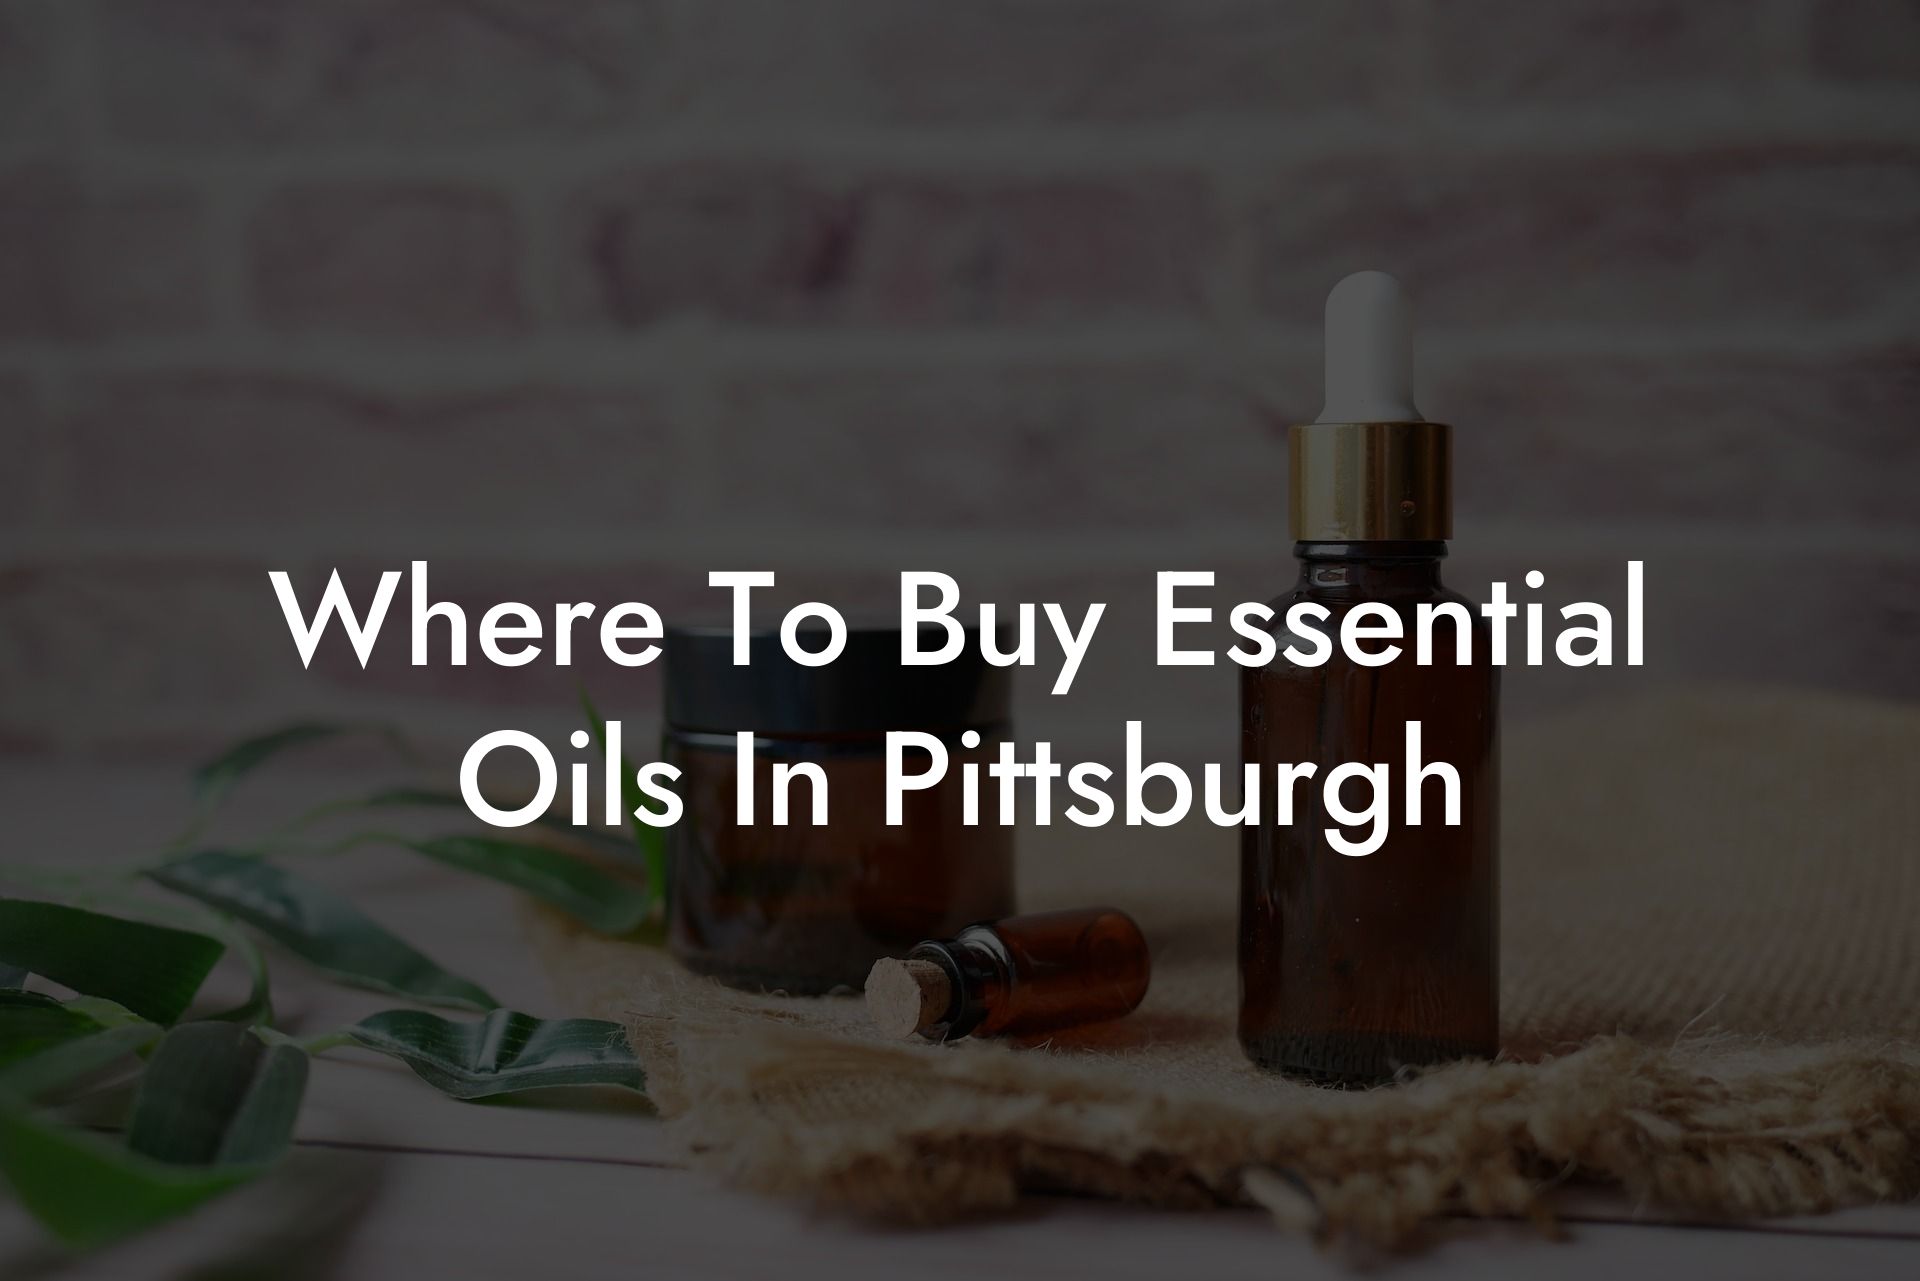 Where To Buy Essential Oils In Pittsburgh